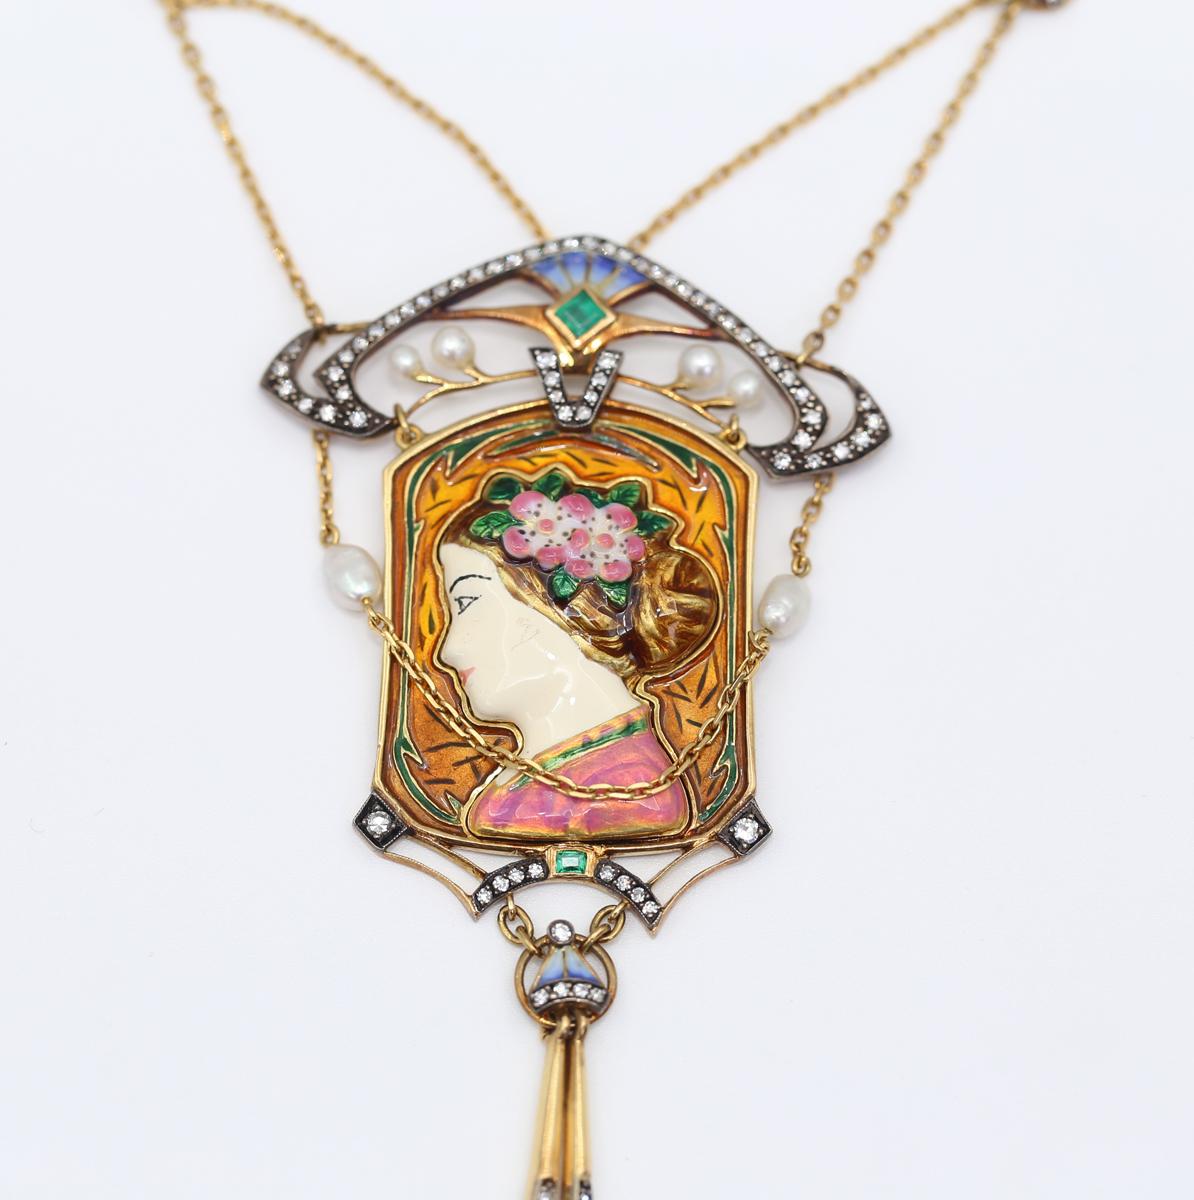 A unique 18K Gold Pendant Necklace takes its inspiration from the great Art Nouveau designs with a twist of Asian influence. Incorporating Pearls, Diamonds, fine colored Enamel.  
18K gold pendant with a unique design, fine quality enamel work, old